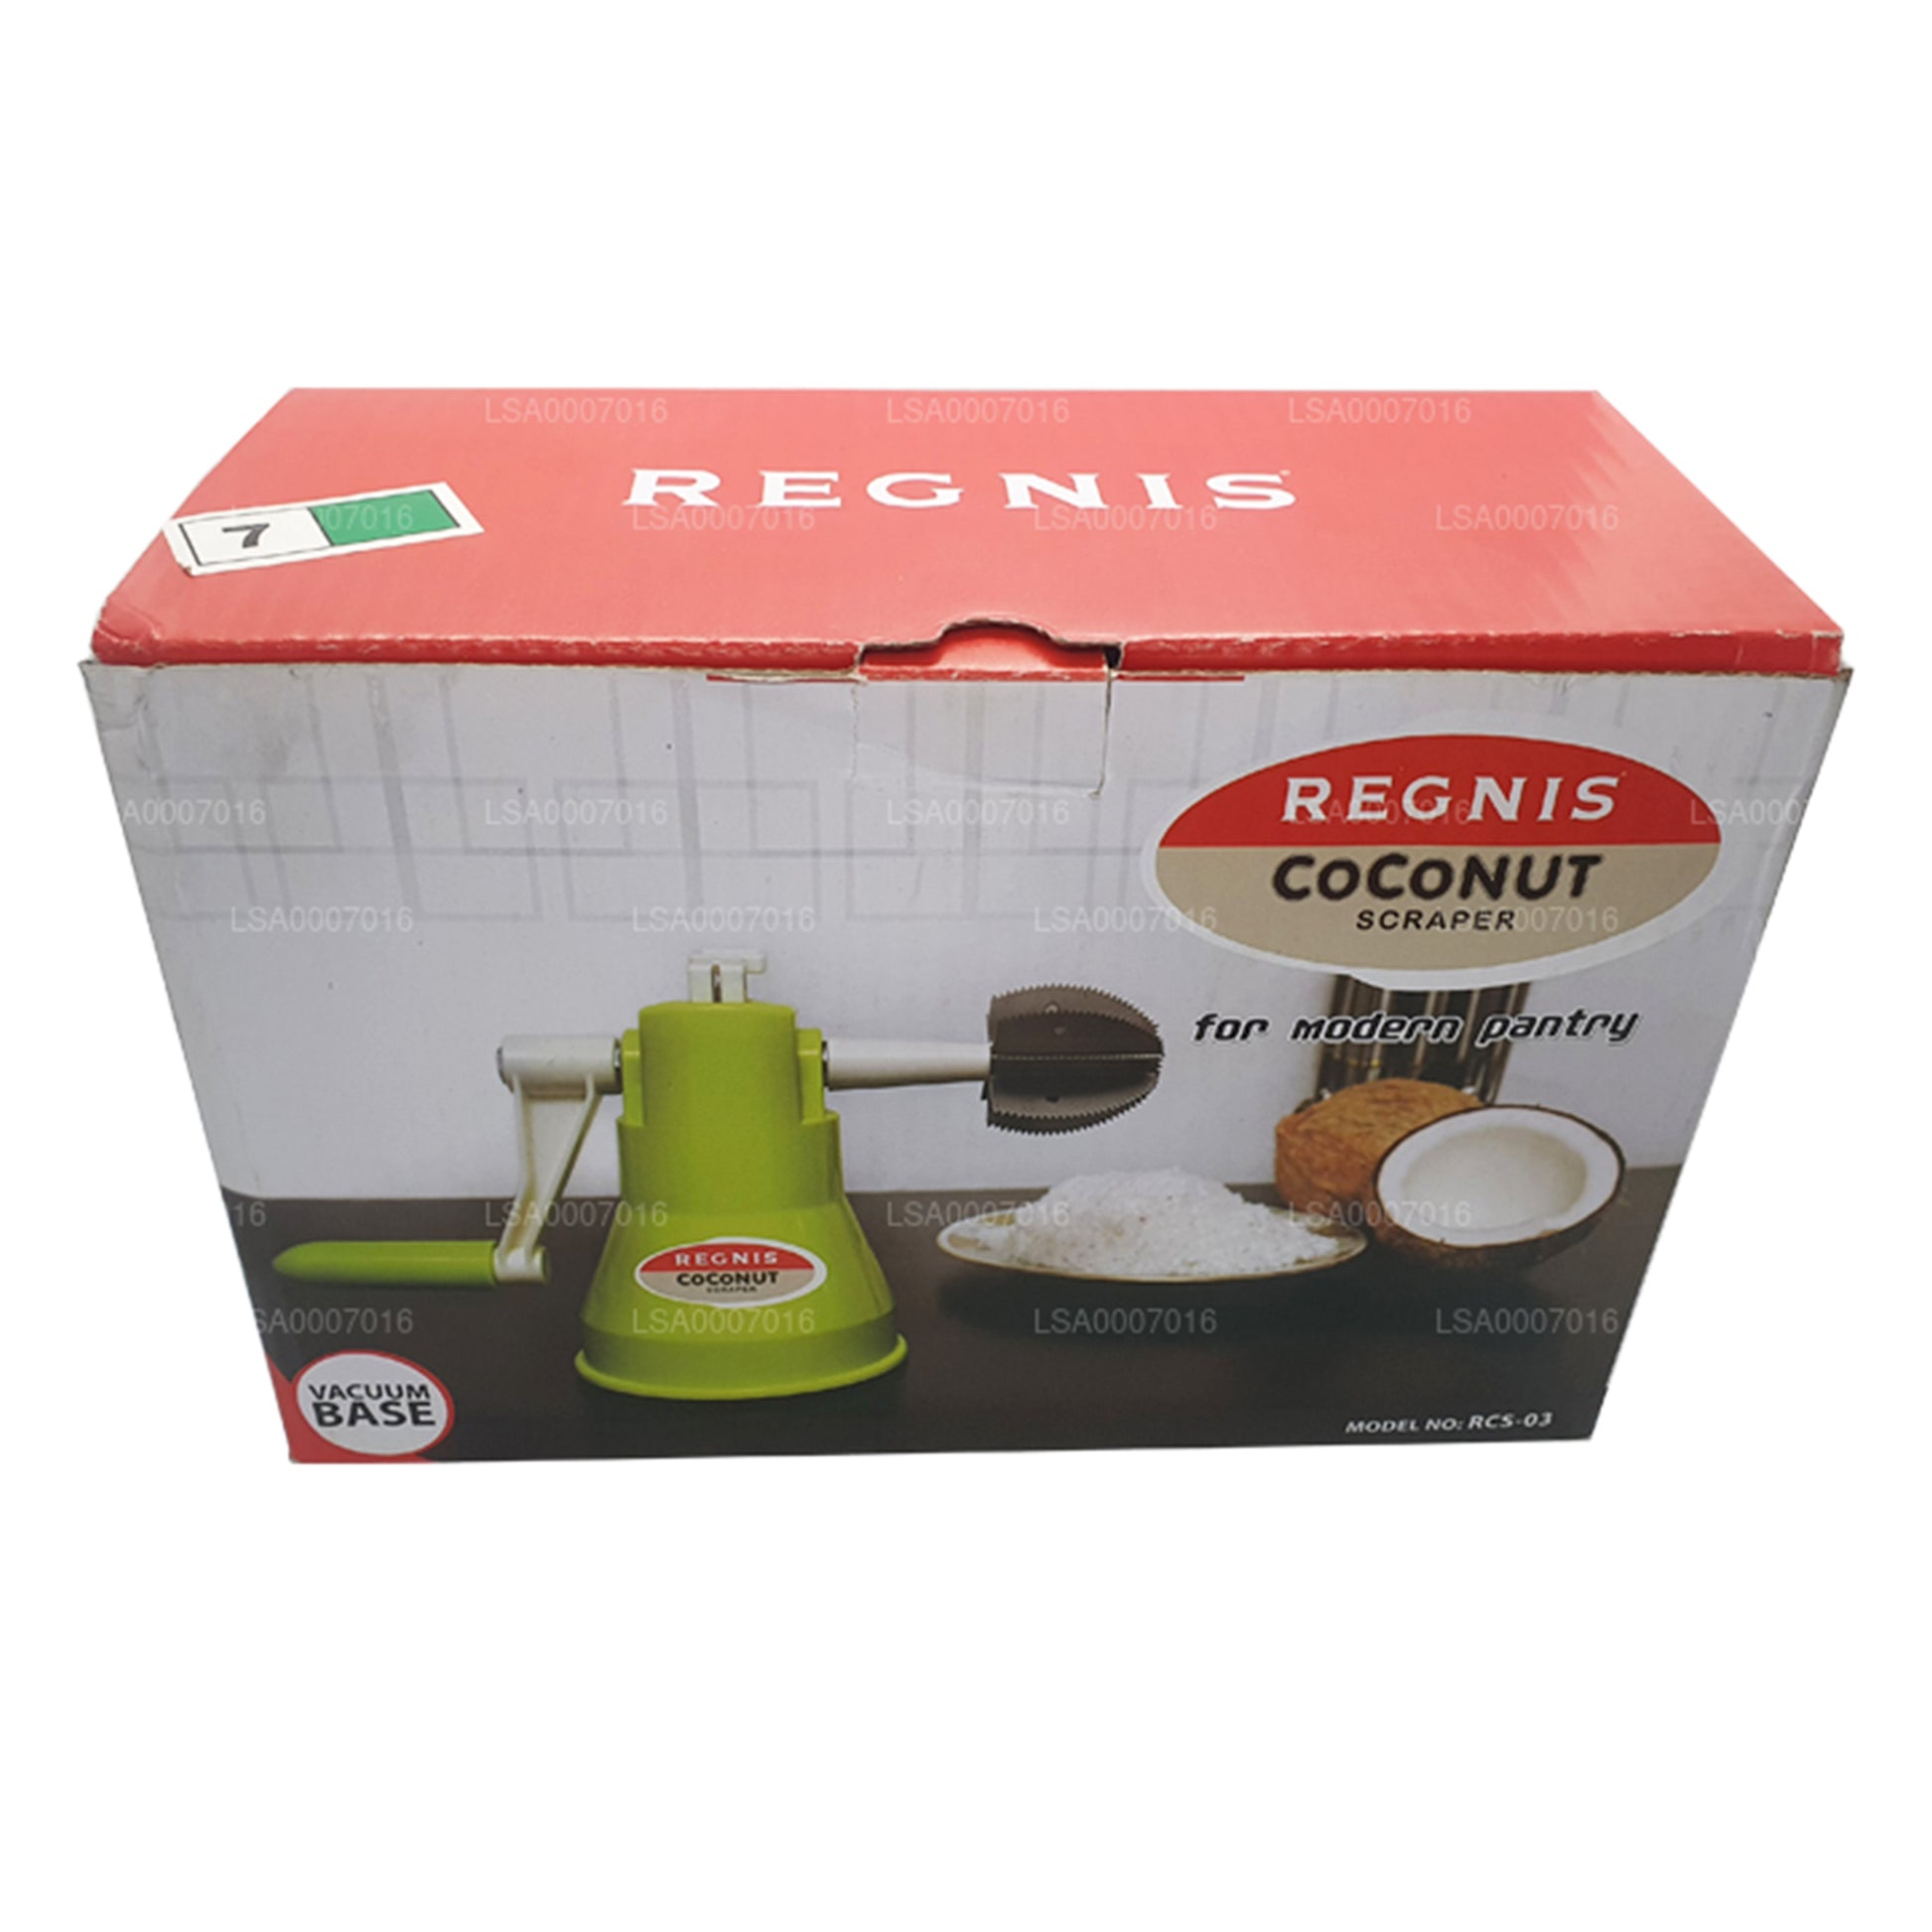 How to use Regnis Electric Coconut Scraper (RCS-01) 